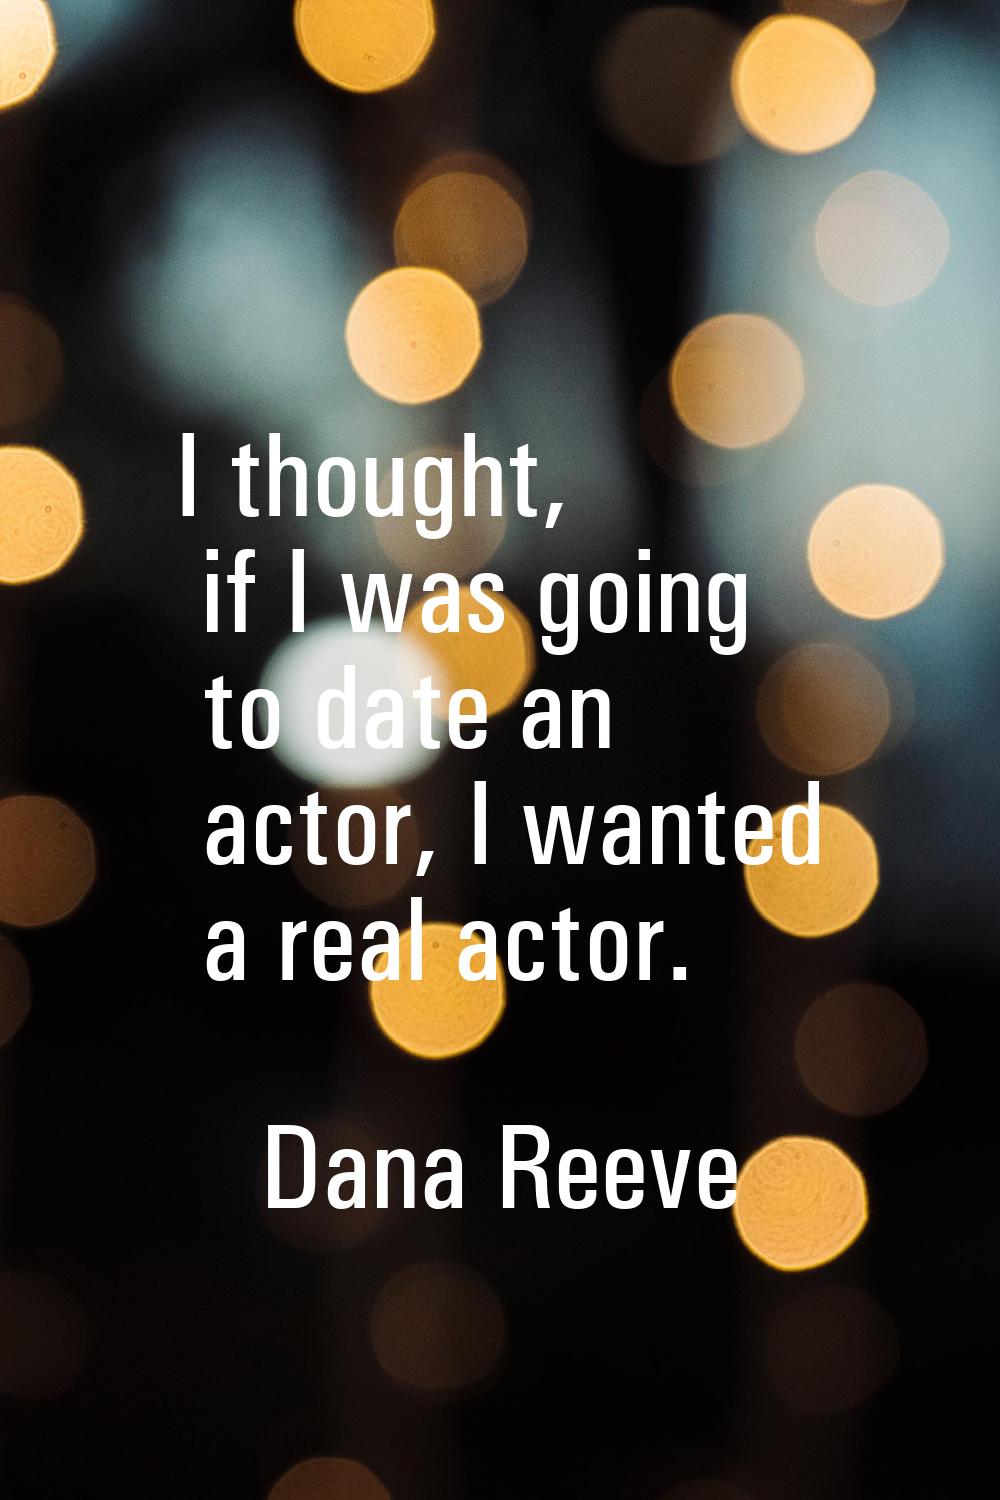 I thought, if I was going to date an actor, I wanted a real actor.